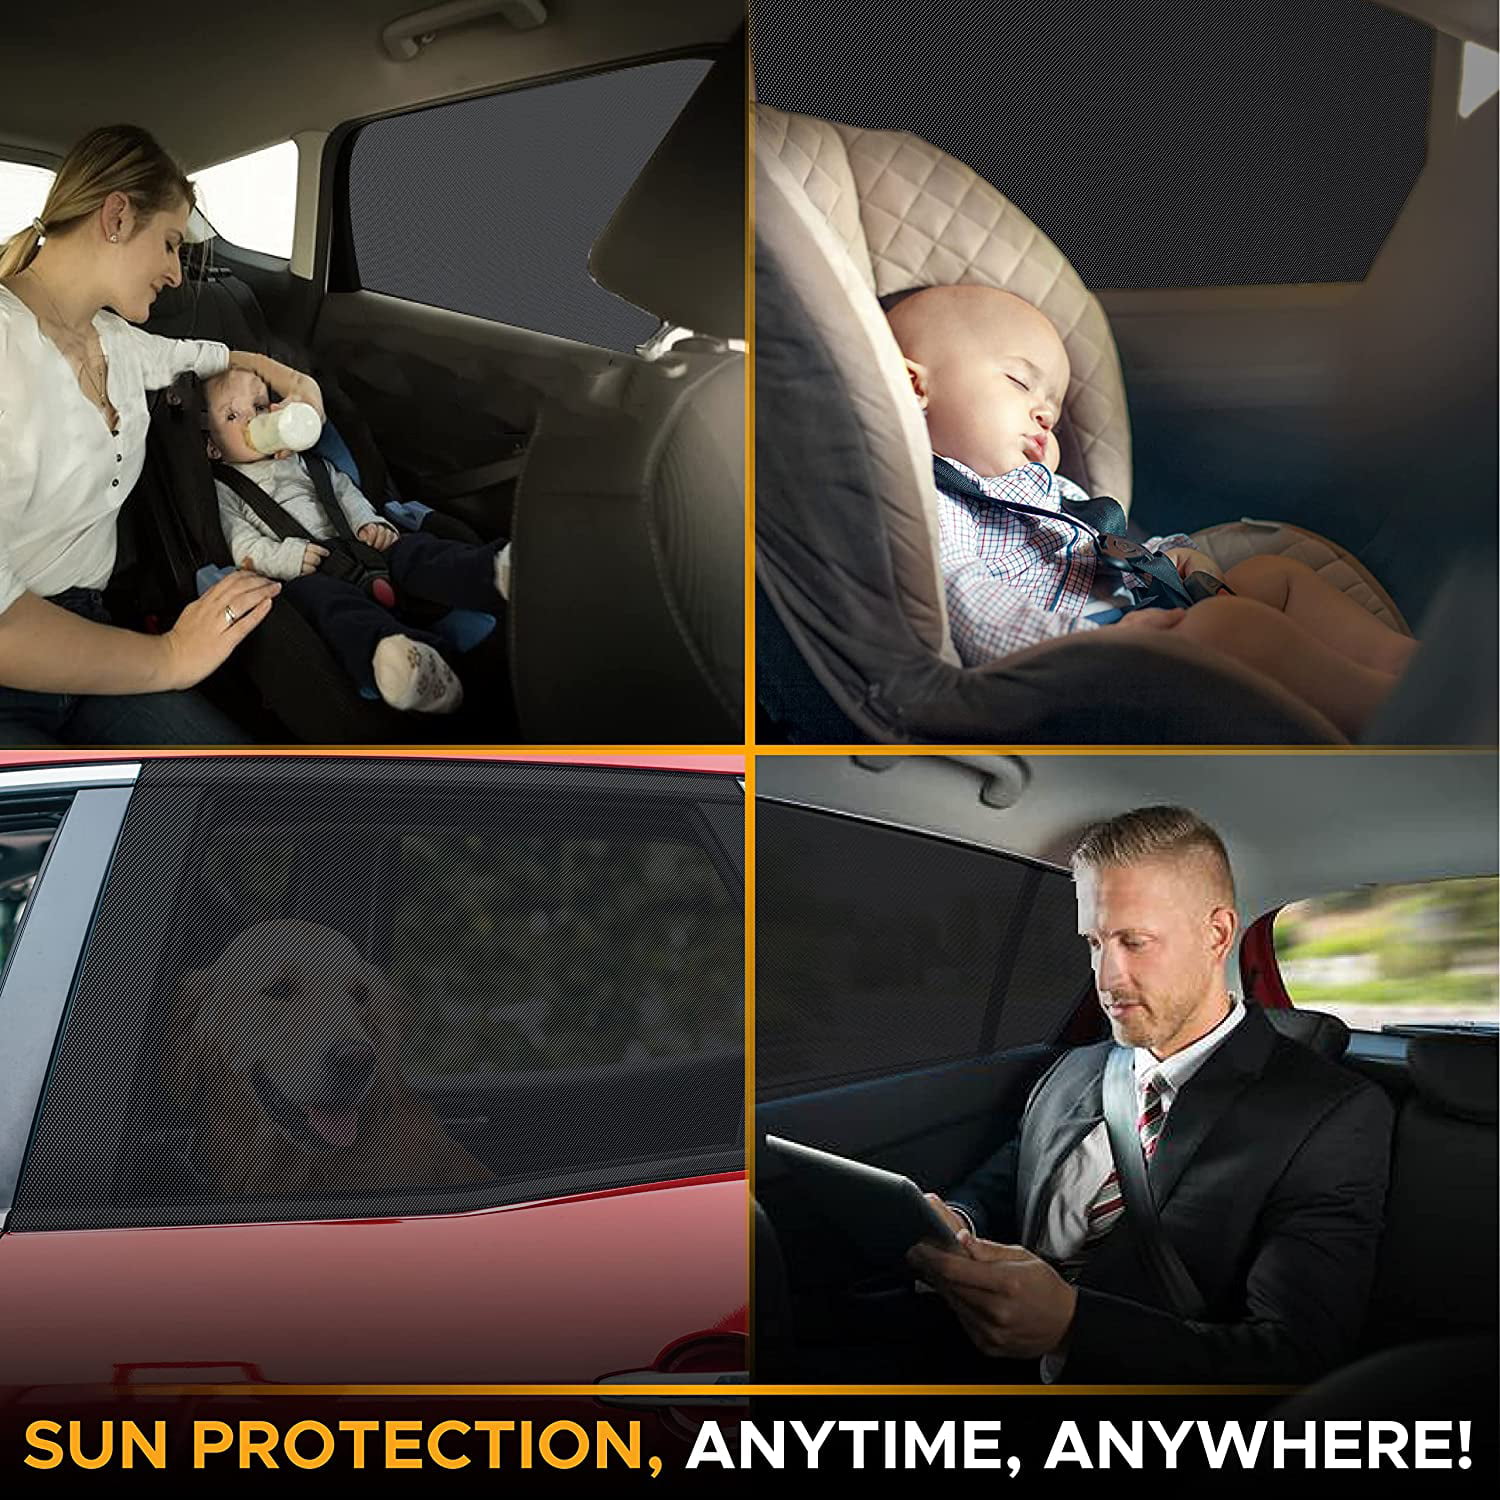  EcoNour Magnetic Side Window Sunshade (4 Pack), Car Window  Shade for Baby Blocks Direct Sunlight and Keeps Your Car Cool, Car  Accessories for Kids Ensure Privacy Protection